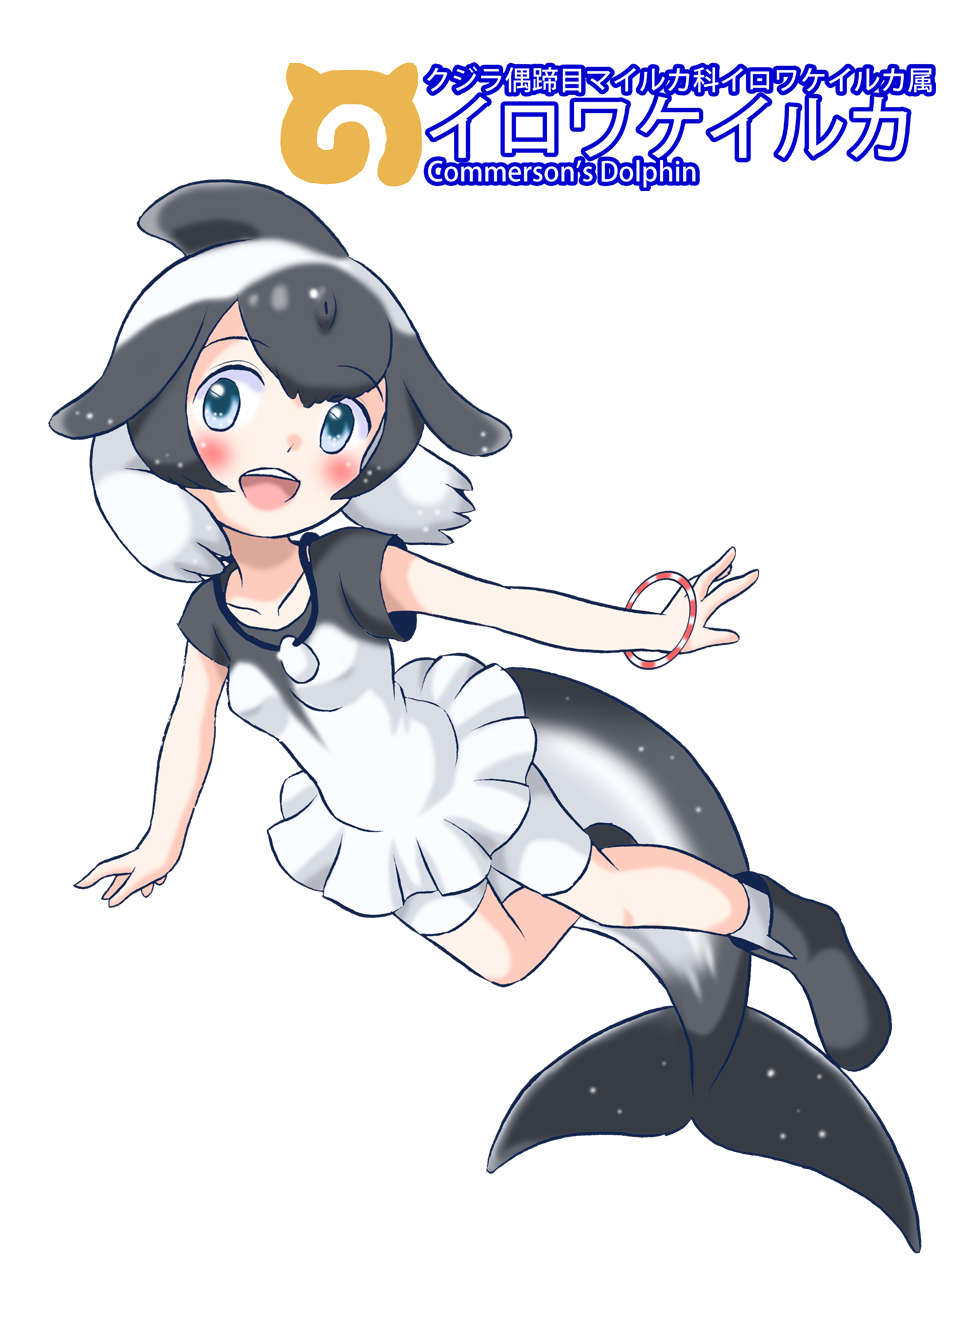 1girl bal_panser black_hair blue_eyes blush boots bracelet character_name commerson's_dolphin commerson's_dolphin_(kemono_friends) dolphin_tail highres japari_symbol jewelry kemono_friends multicolored_hair necklace open_mouth simple_background solo teeth two-tone_hair white_background white_hair